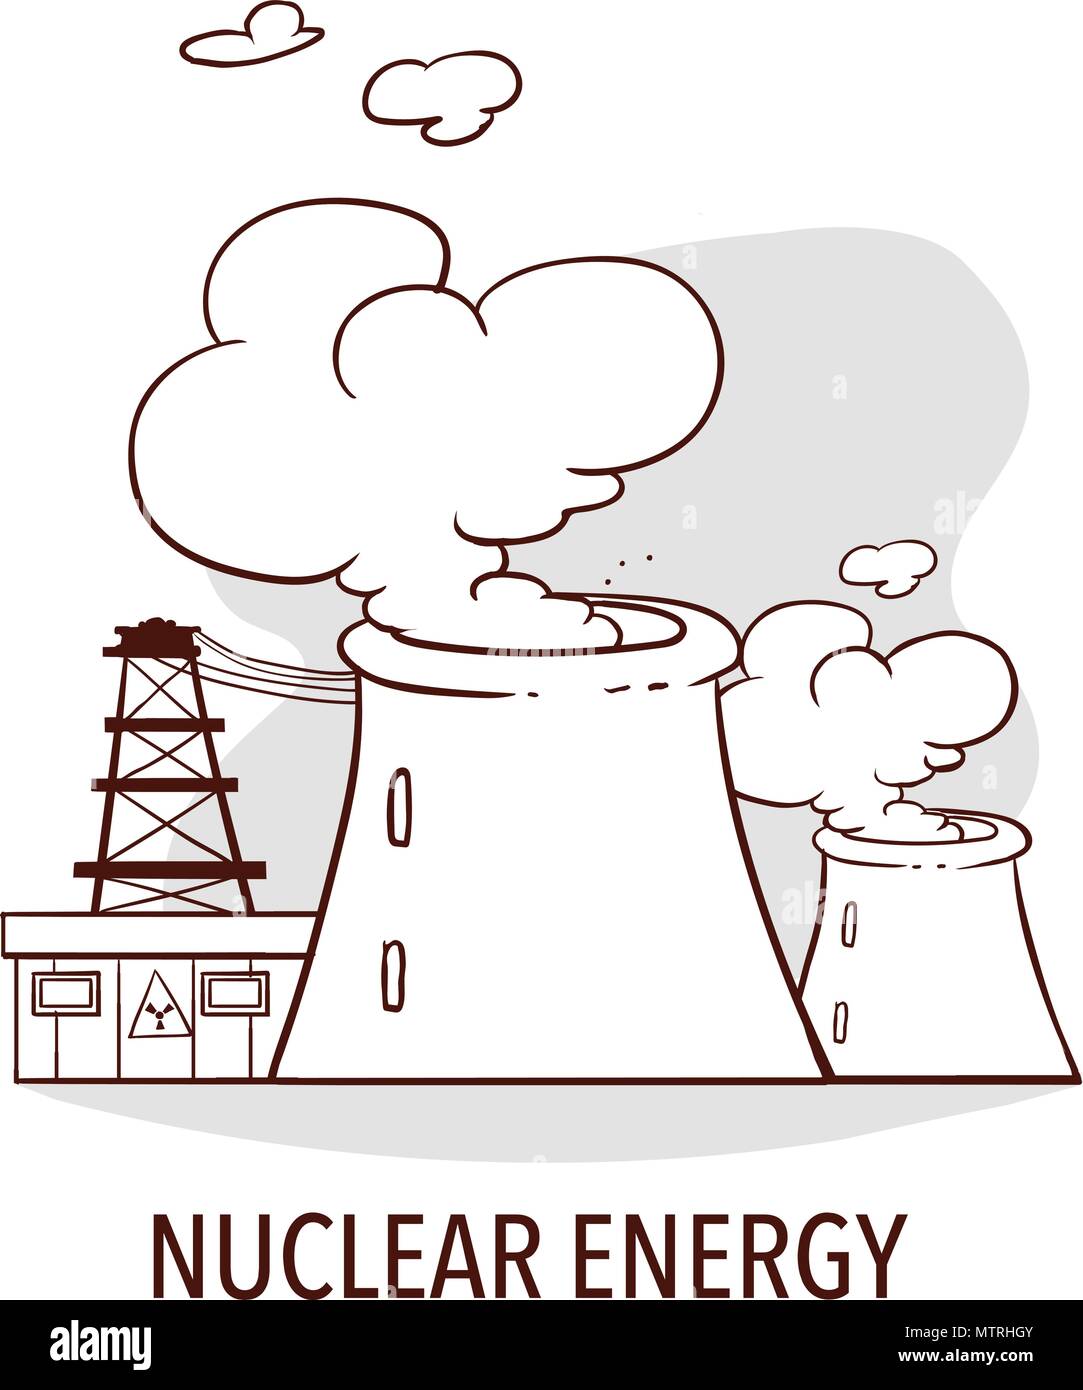 Nuclear energy industrial concept. Stock Vector